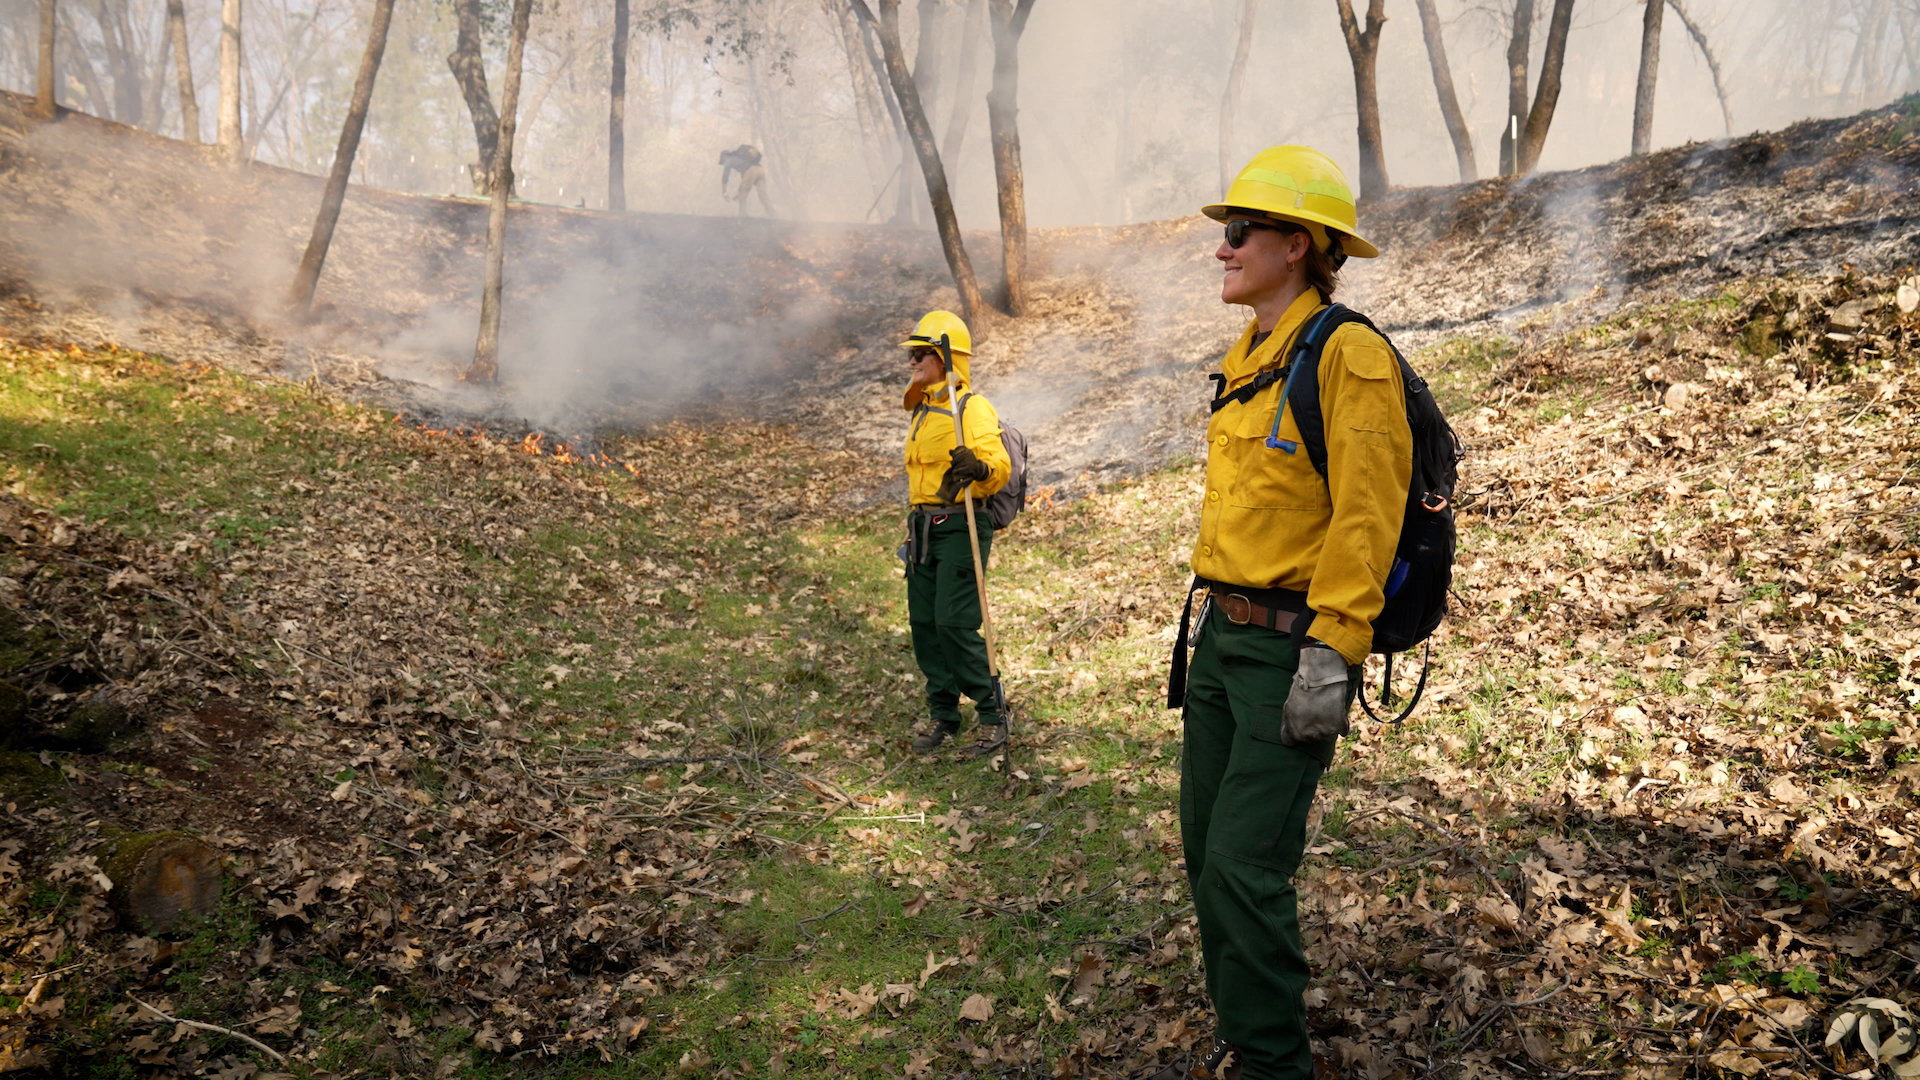 Two women in yellow firefighting shirts and helmets stand in meadow with light smoke in background during prescribed burn.